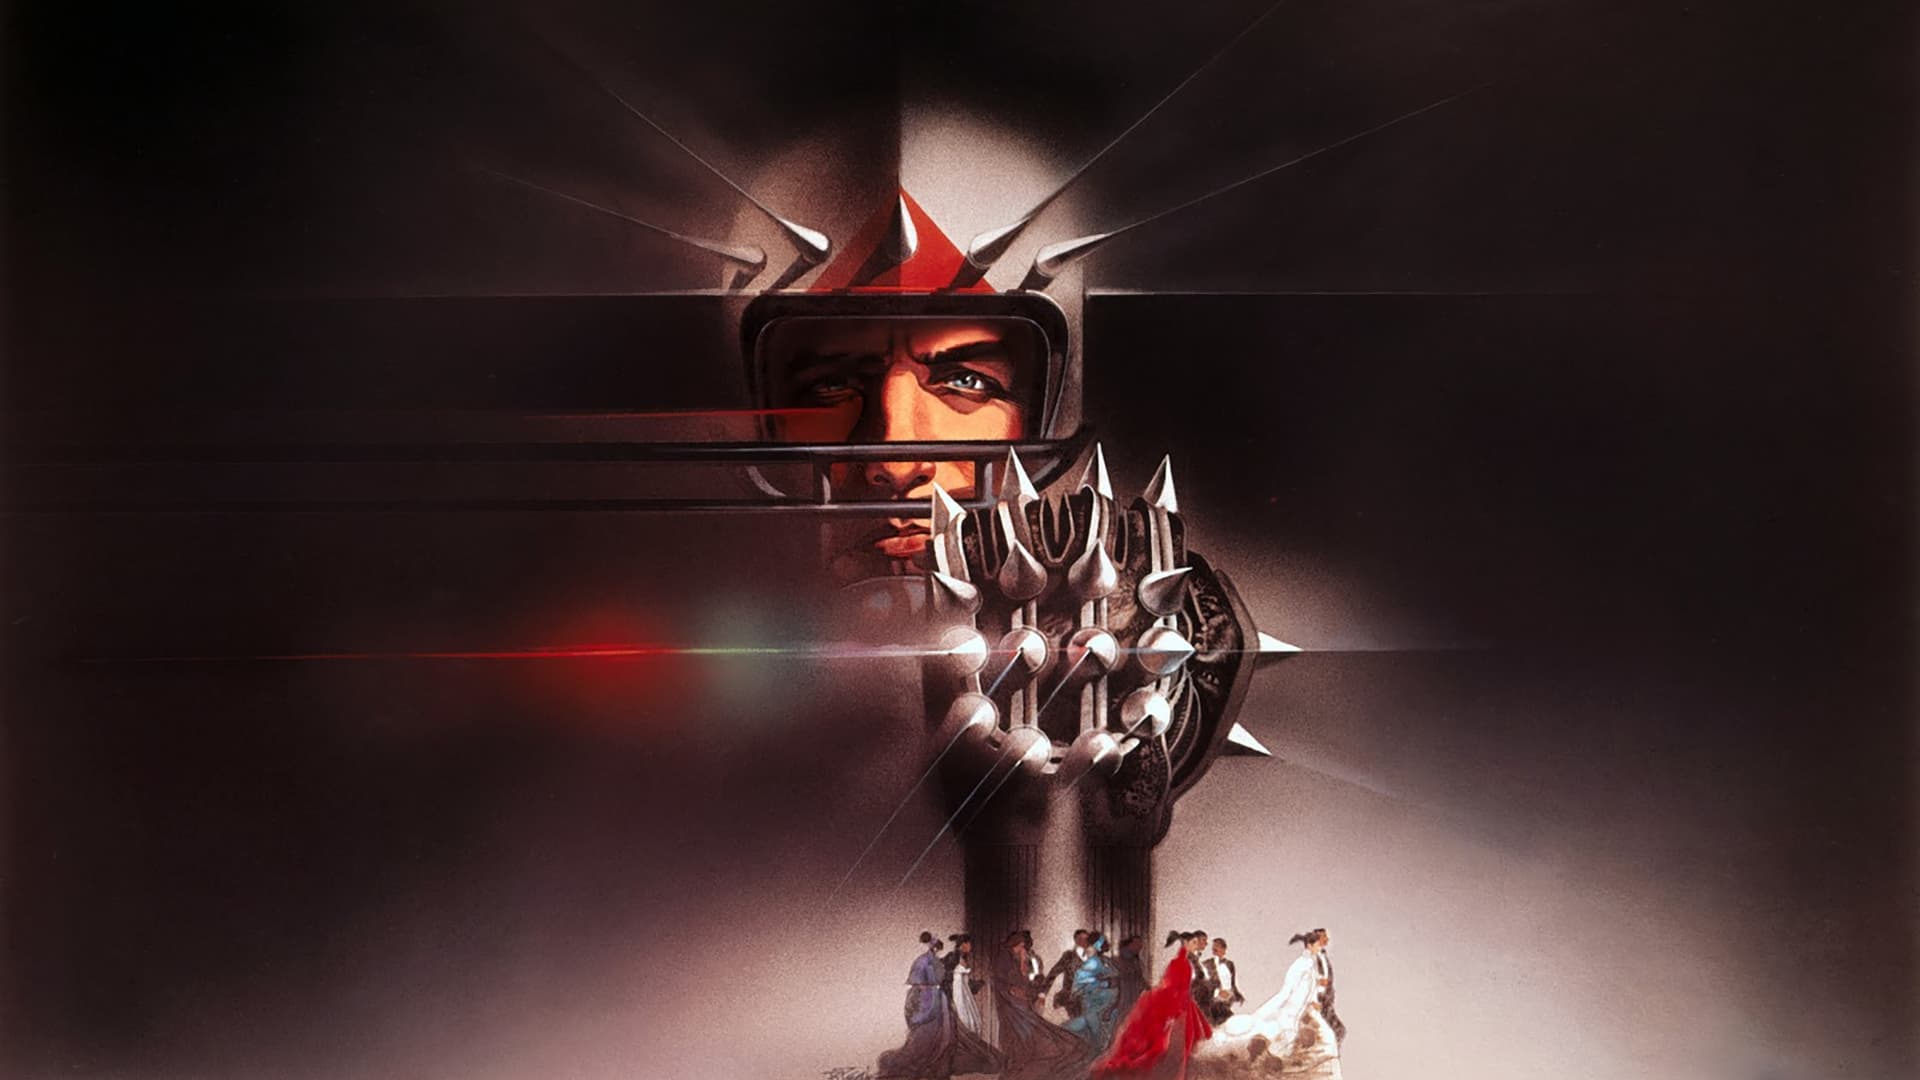 Rollerball 1975 123movies